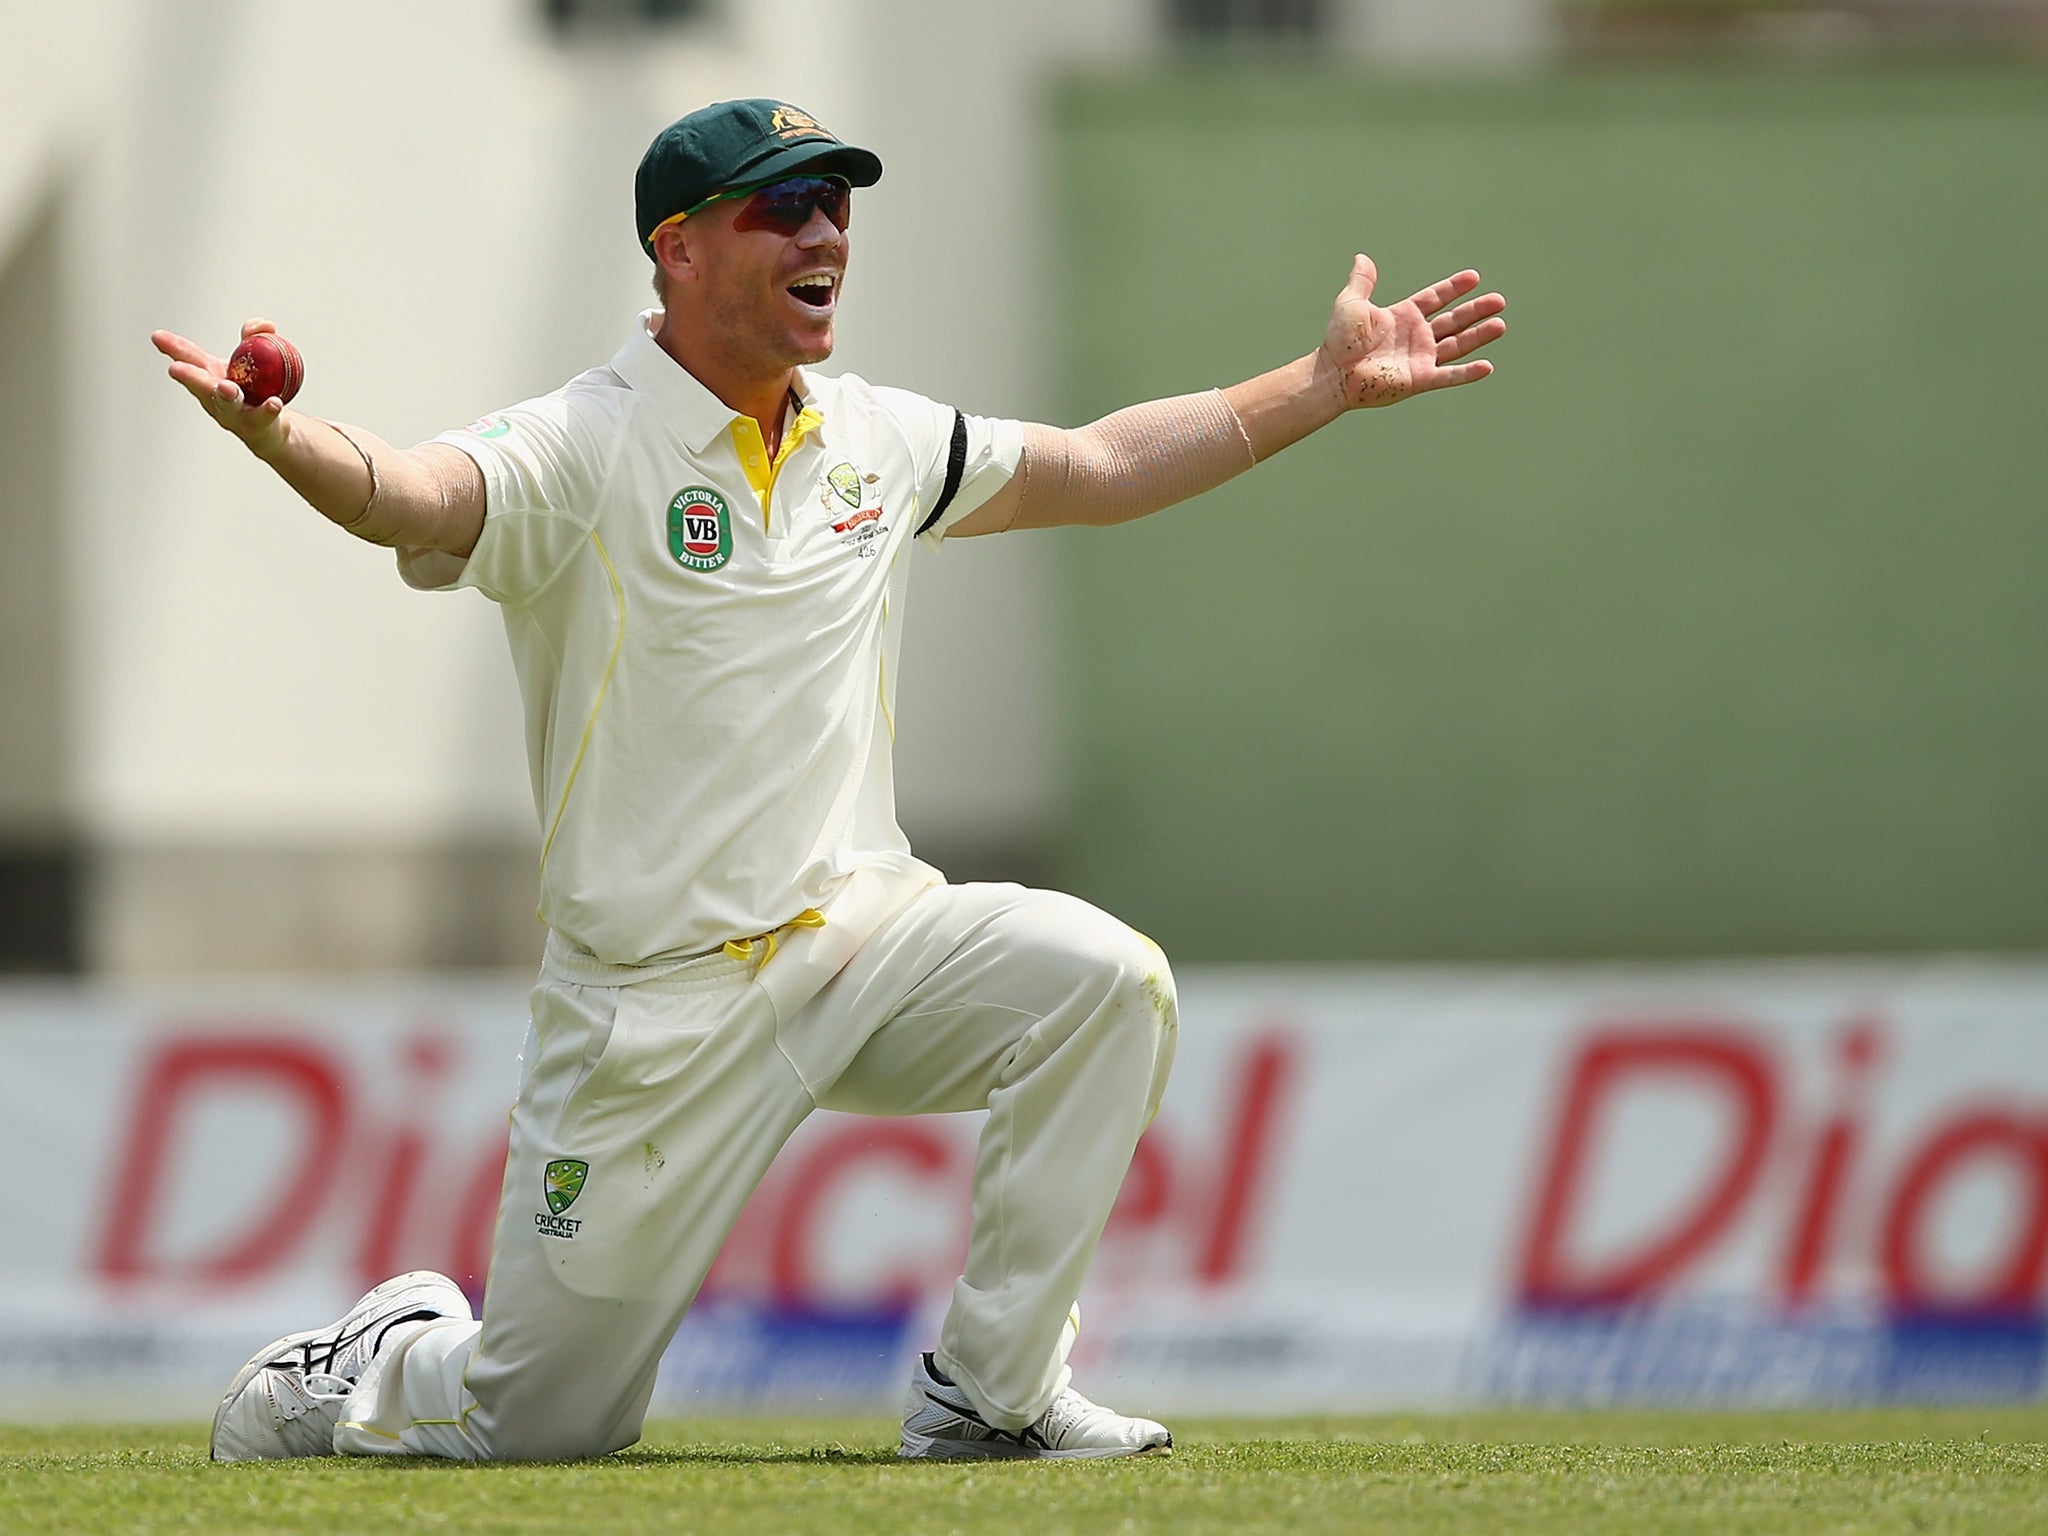 David Warner, pictured, has accused England's Joe Root of being racially insensitive